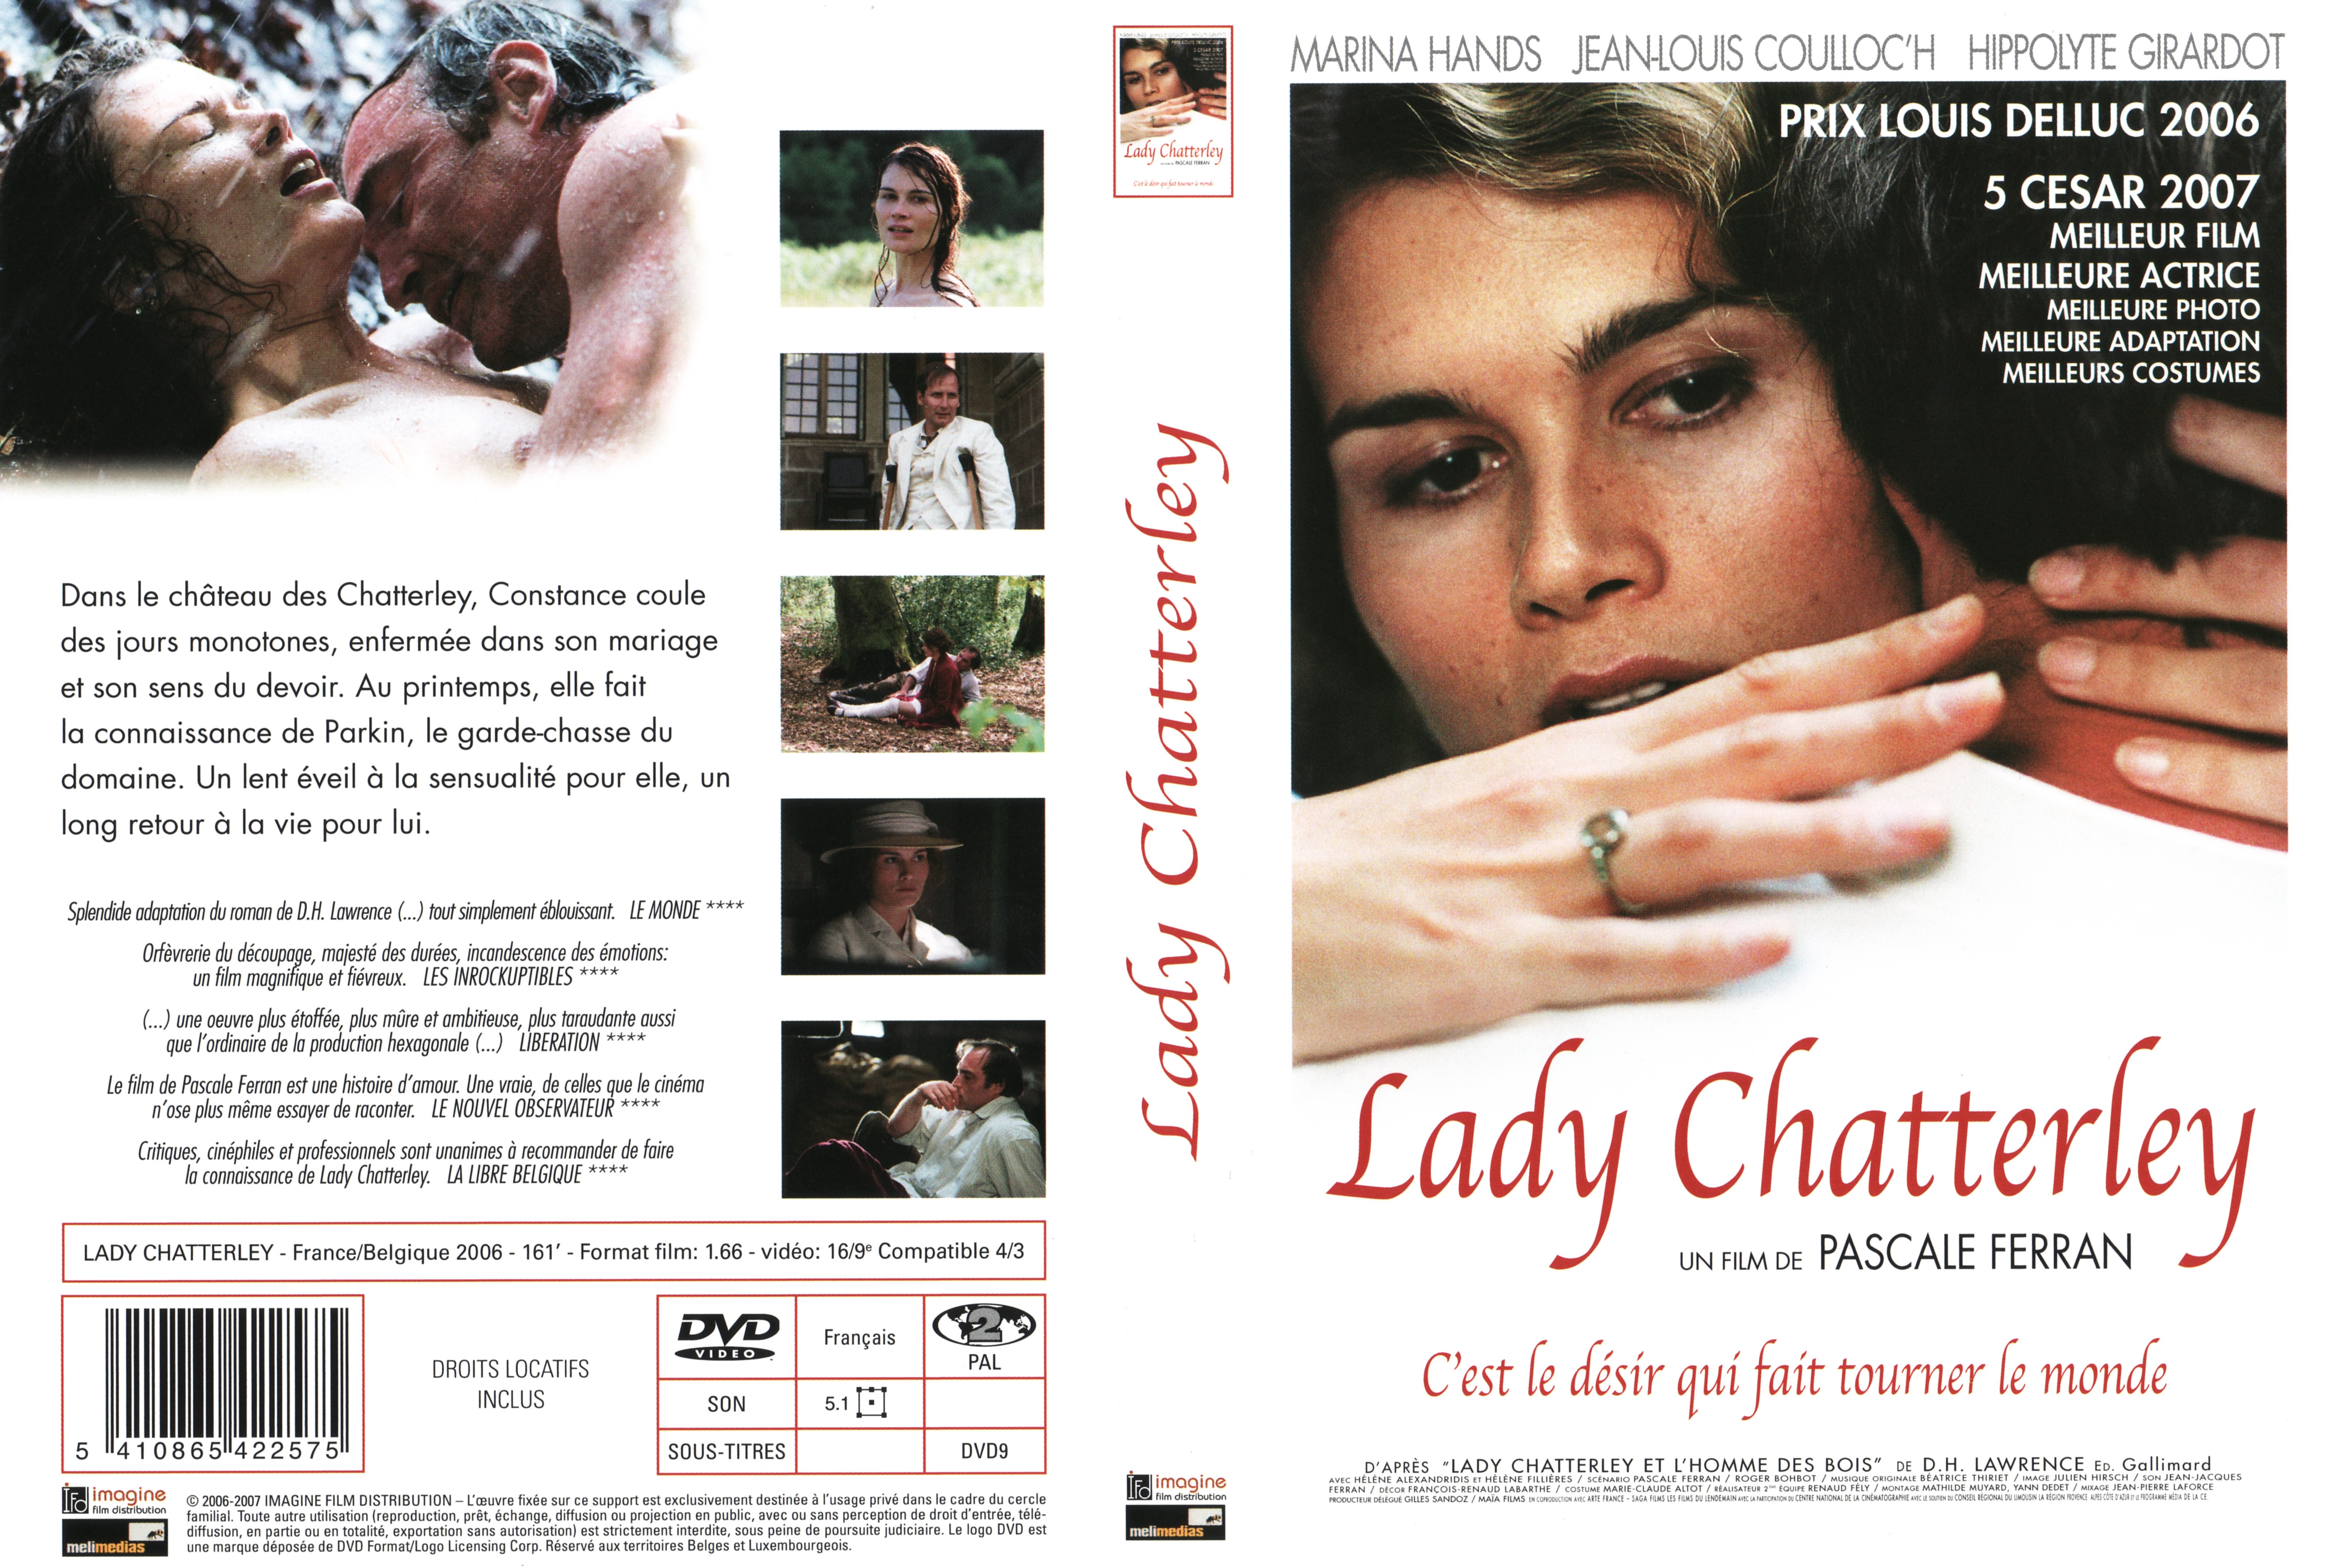 Jaquette DVD Lady Chatterley